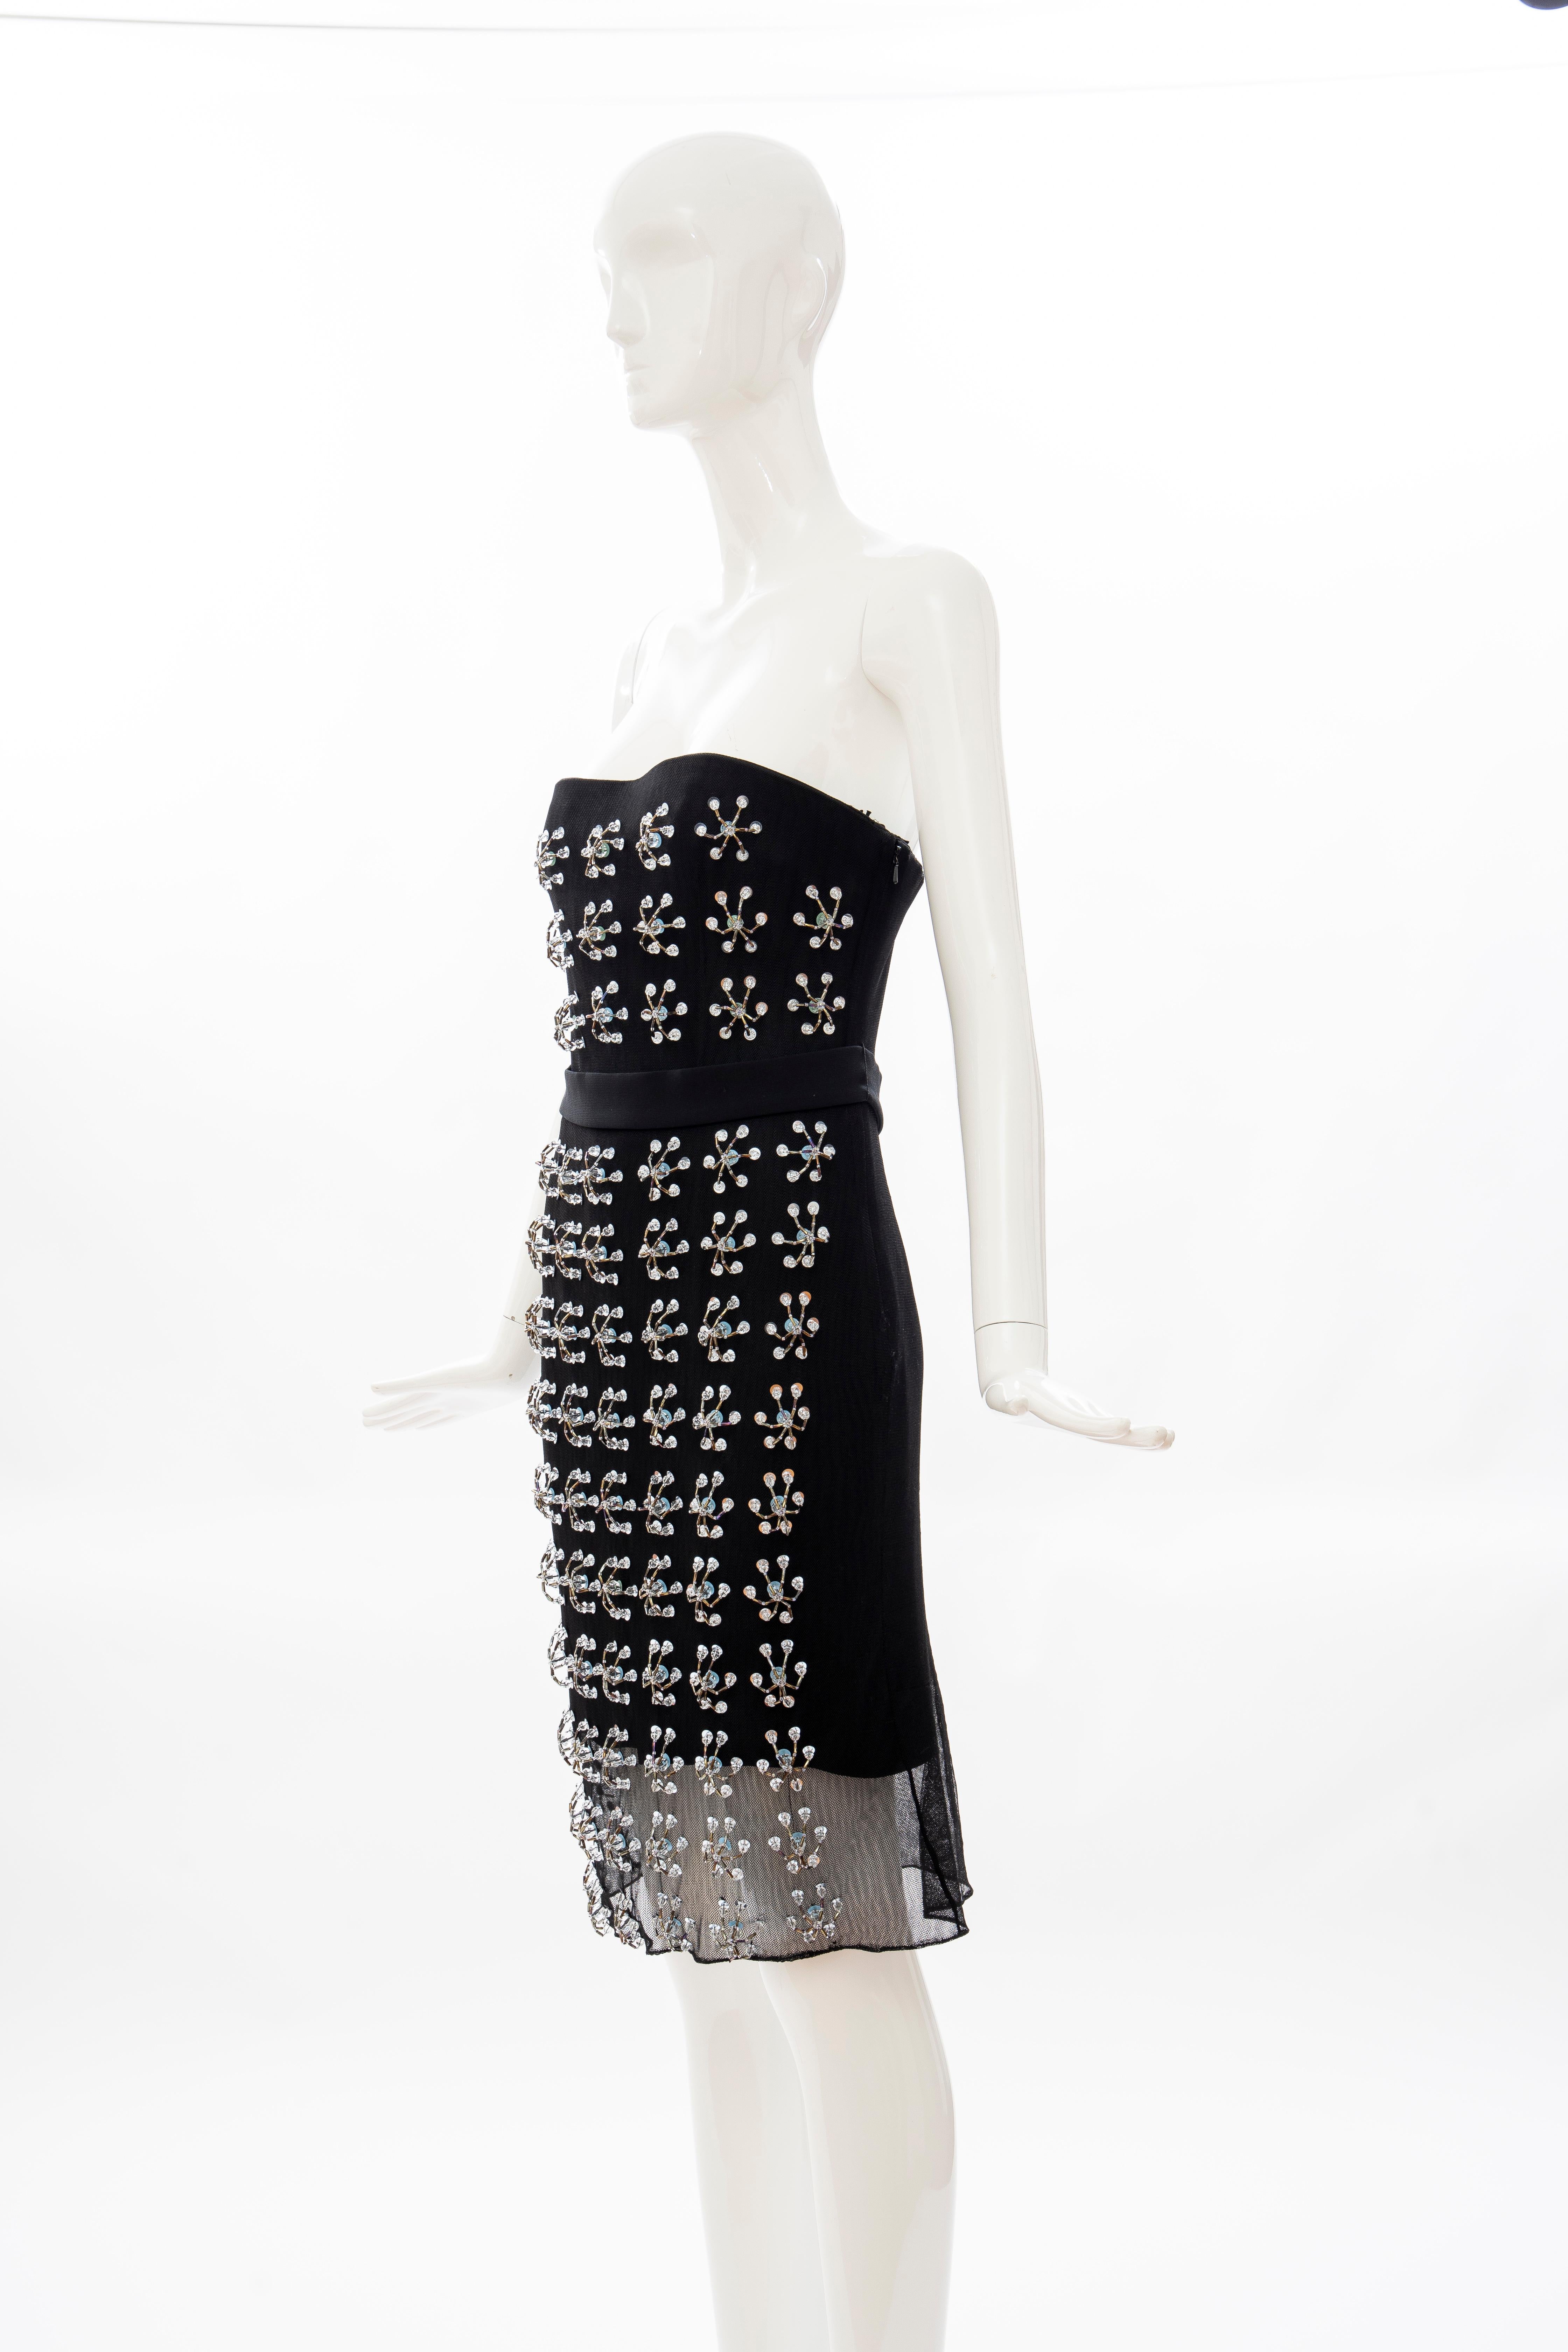 Raf Simons for Christian Dior Runway Strapless Embroidered Dress, Spring 2013 For Sale 2